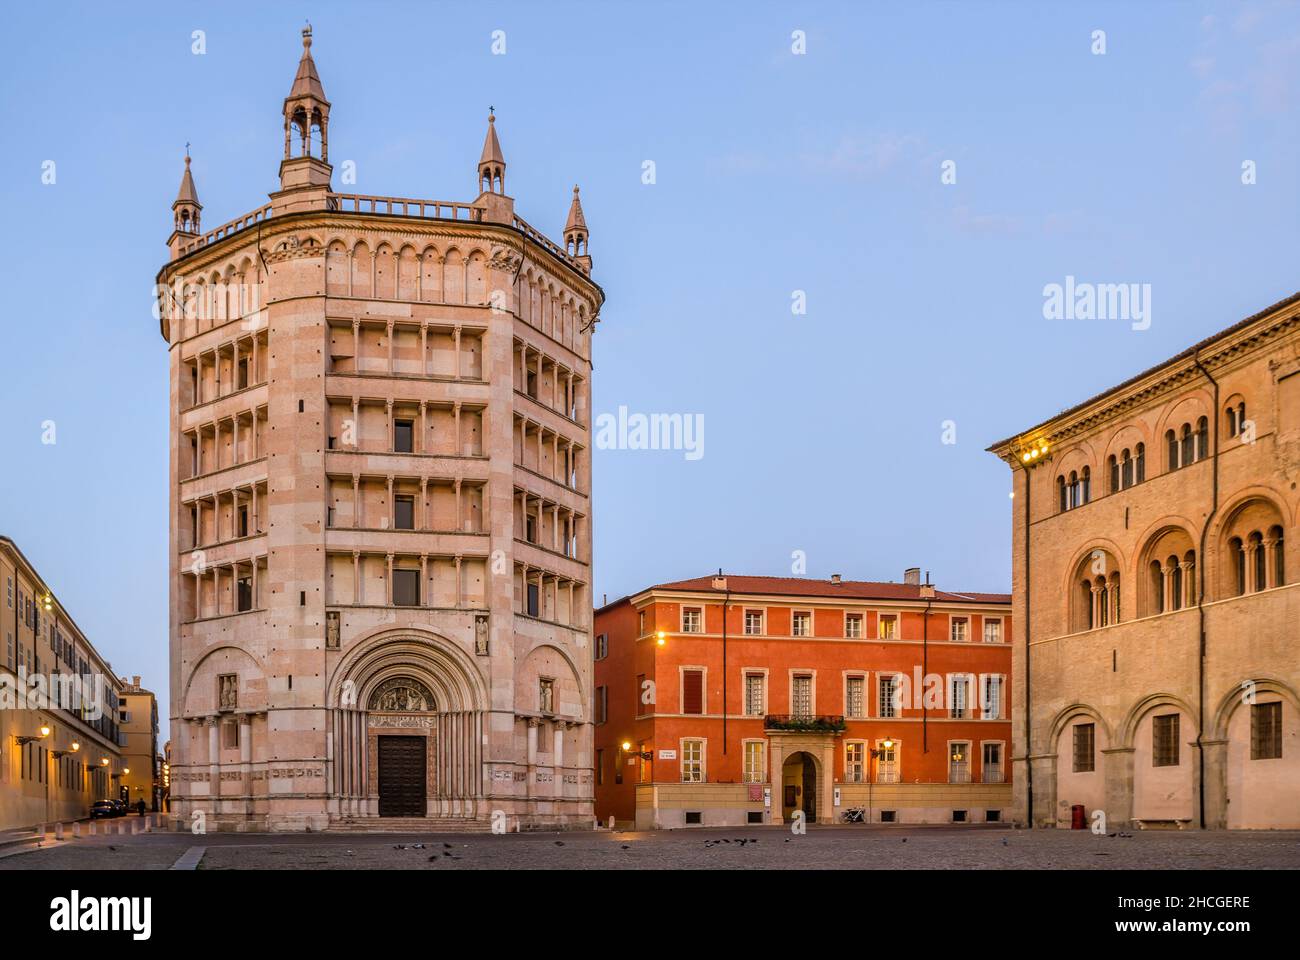 Piazza Duomo in the historical town centre of Parma, Emilia-Romagna, Italy, at dawn. Stock Photo